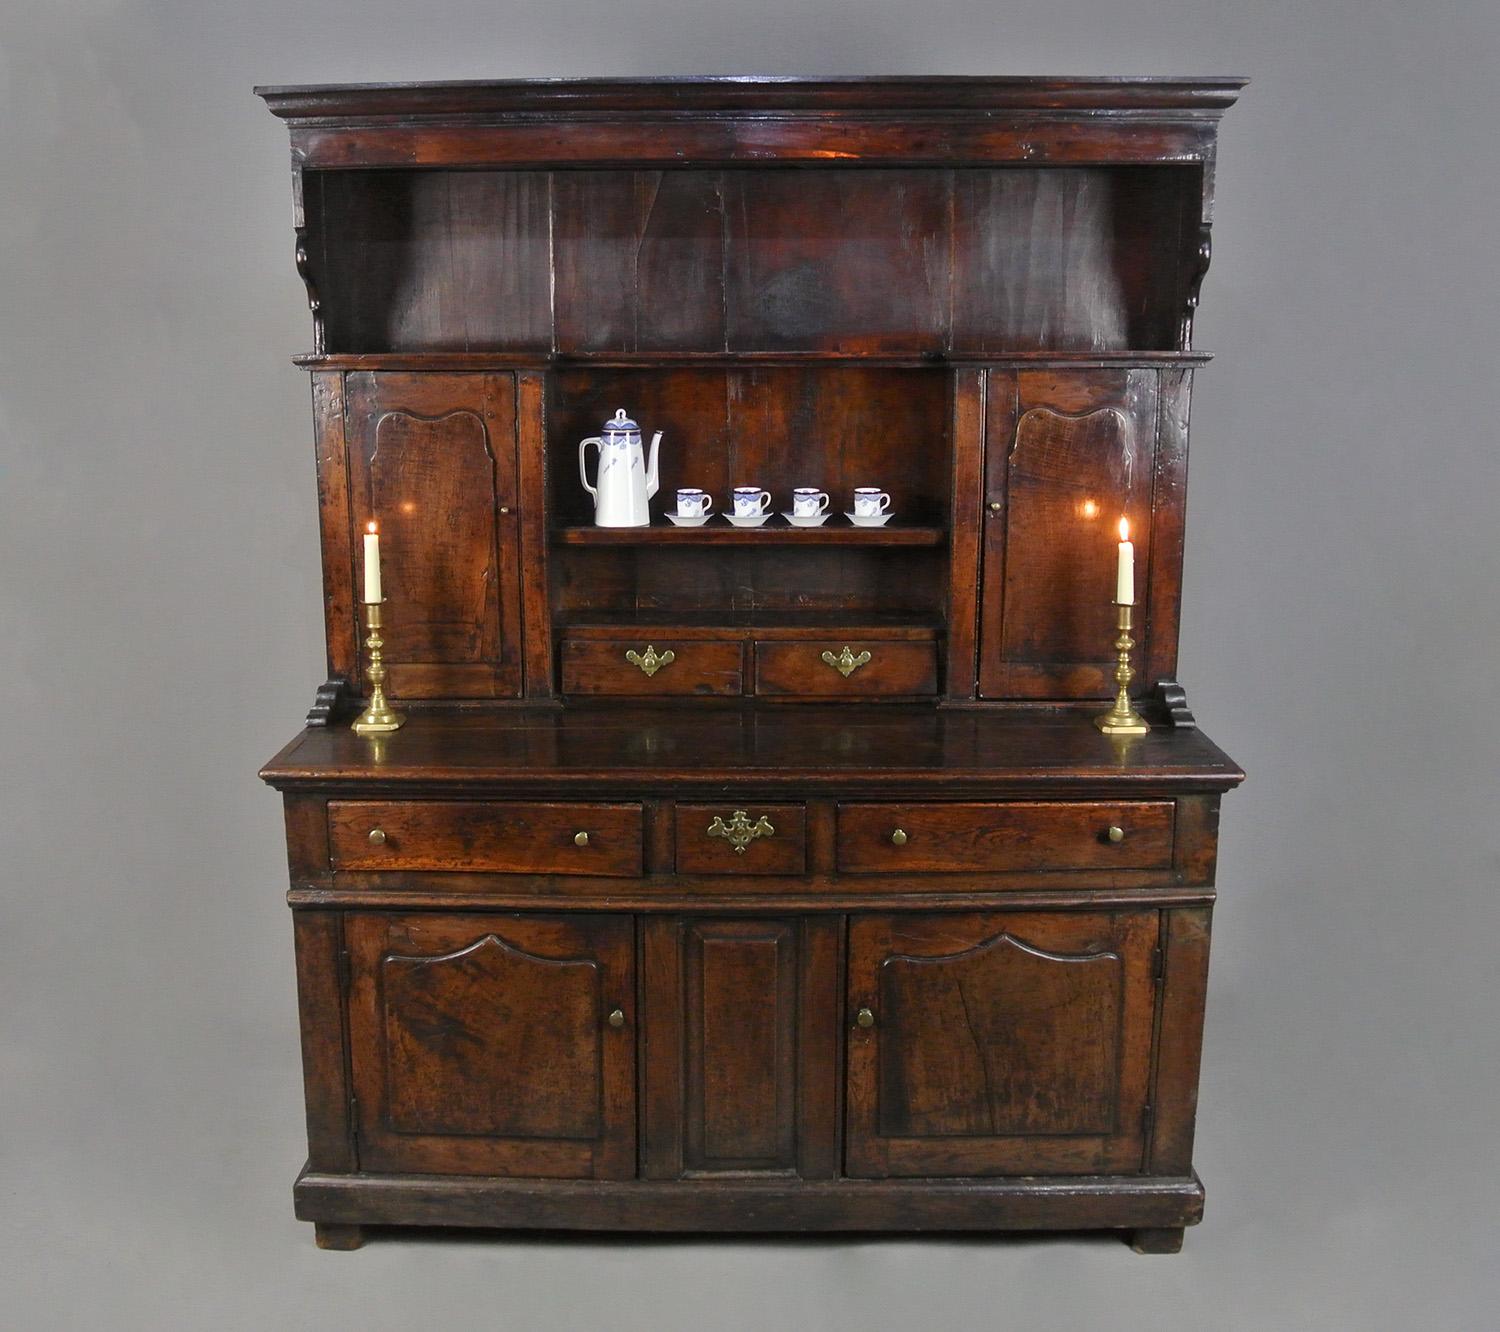 This is an original, charming and beautiful small country dresser made in Wales in c. 1750 and of exceptional colour and natural deep patination.

The dresser is peg jointed throughout – original pegs - and retains all of its original timbers